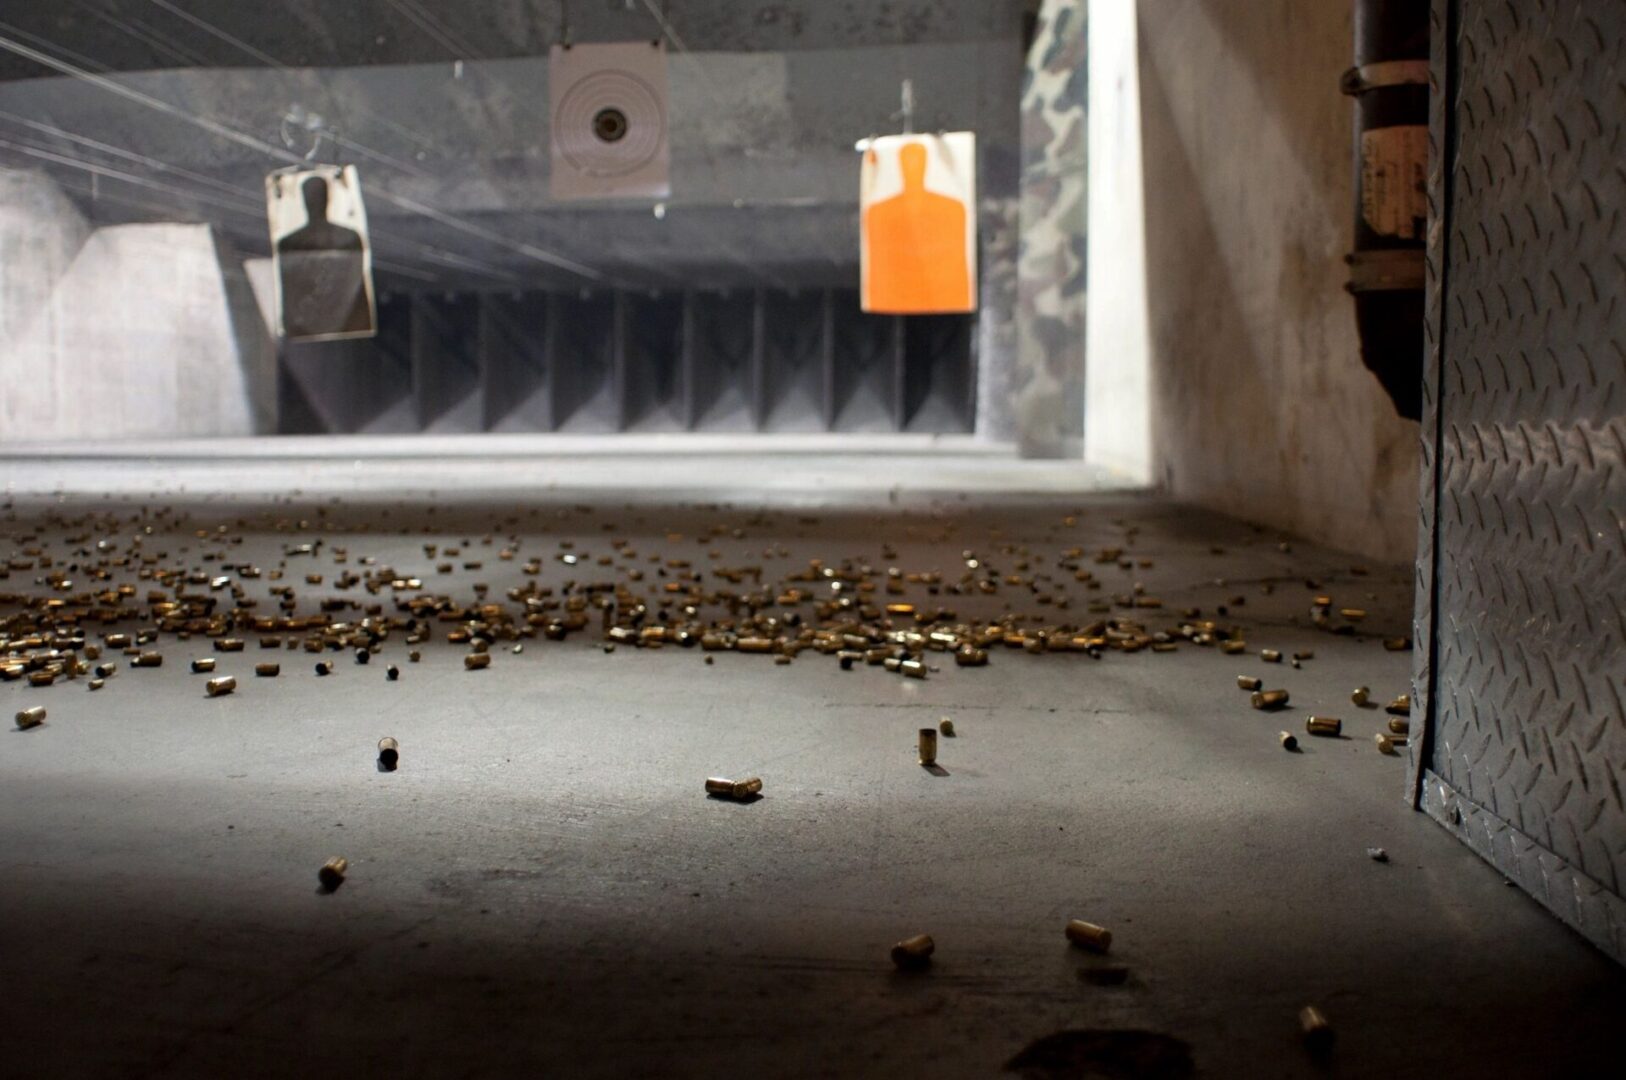 A lot of bullet shells on the floor in a target practice